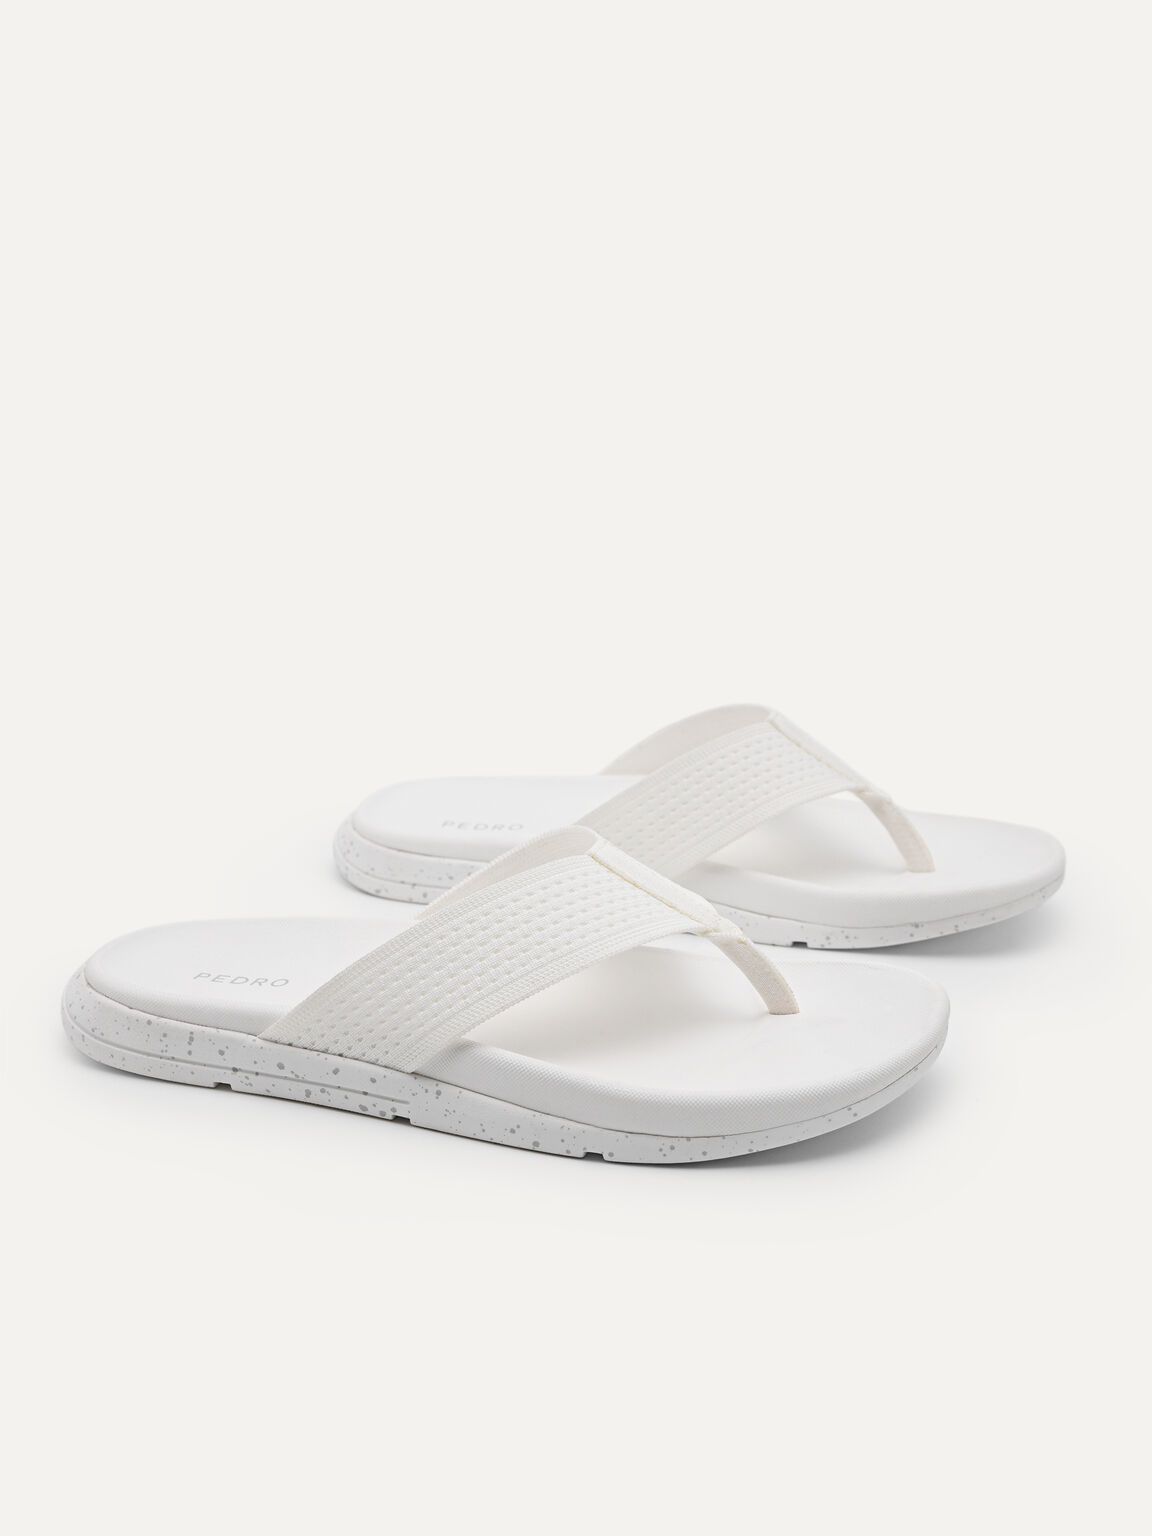 Knitted Lightweight Thong Sandals, White